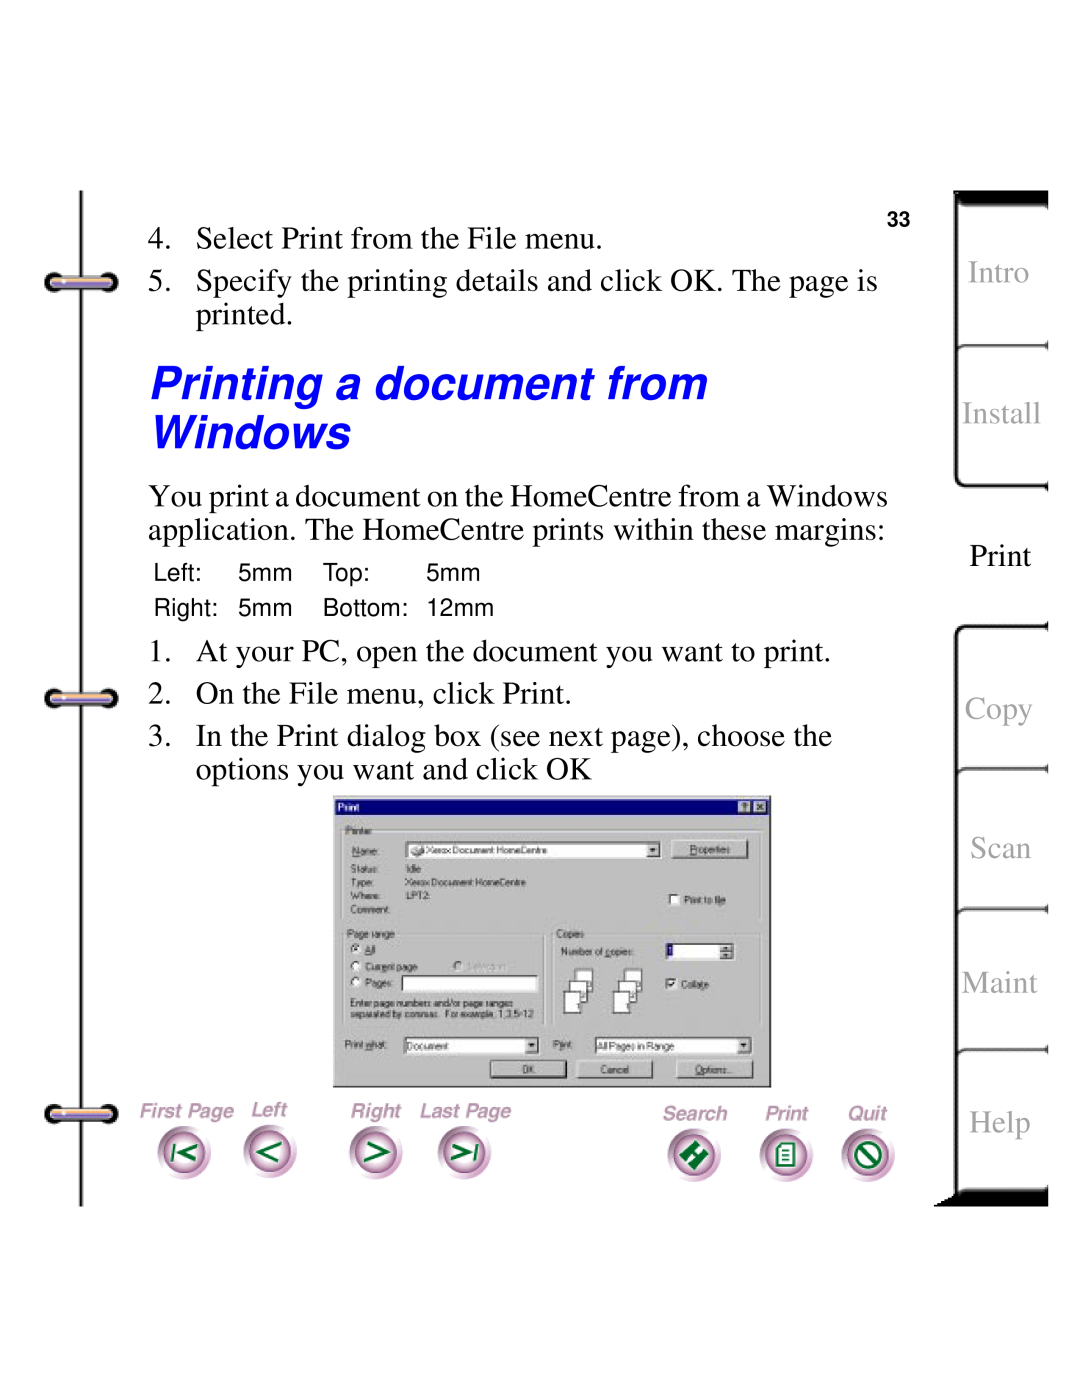 Xerox Document HomeCentre manual Printing a document from Windows, Intro Install, Copy Scan Maint, Help 